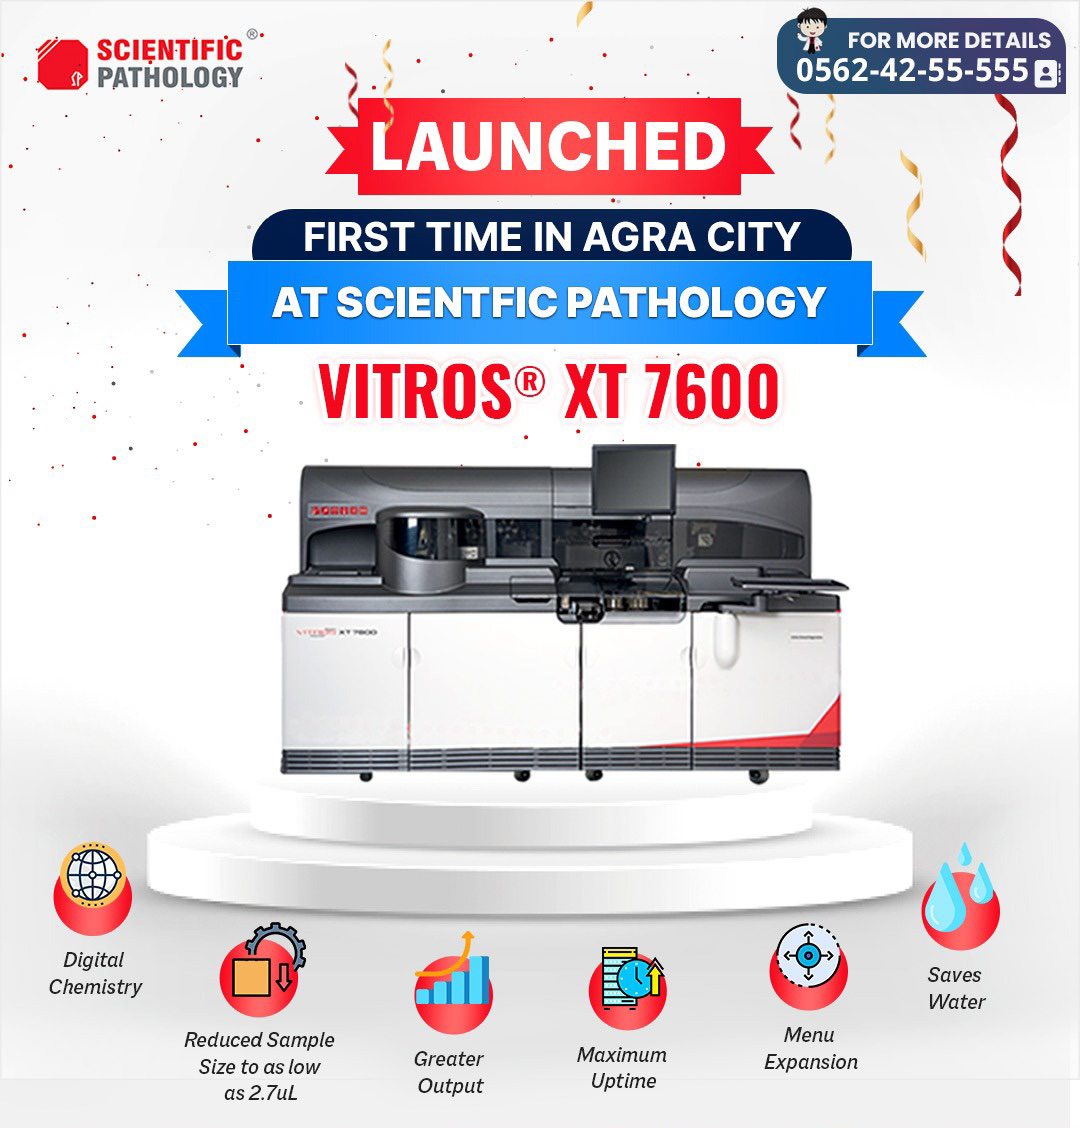 Launched - VITROS -7600 Dry Chemistry Analyser First Time in Agra